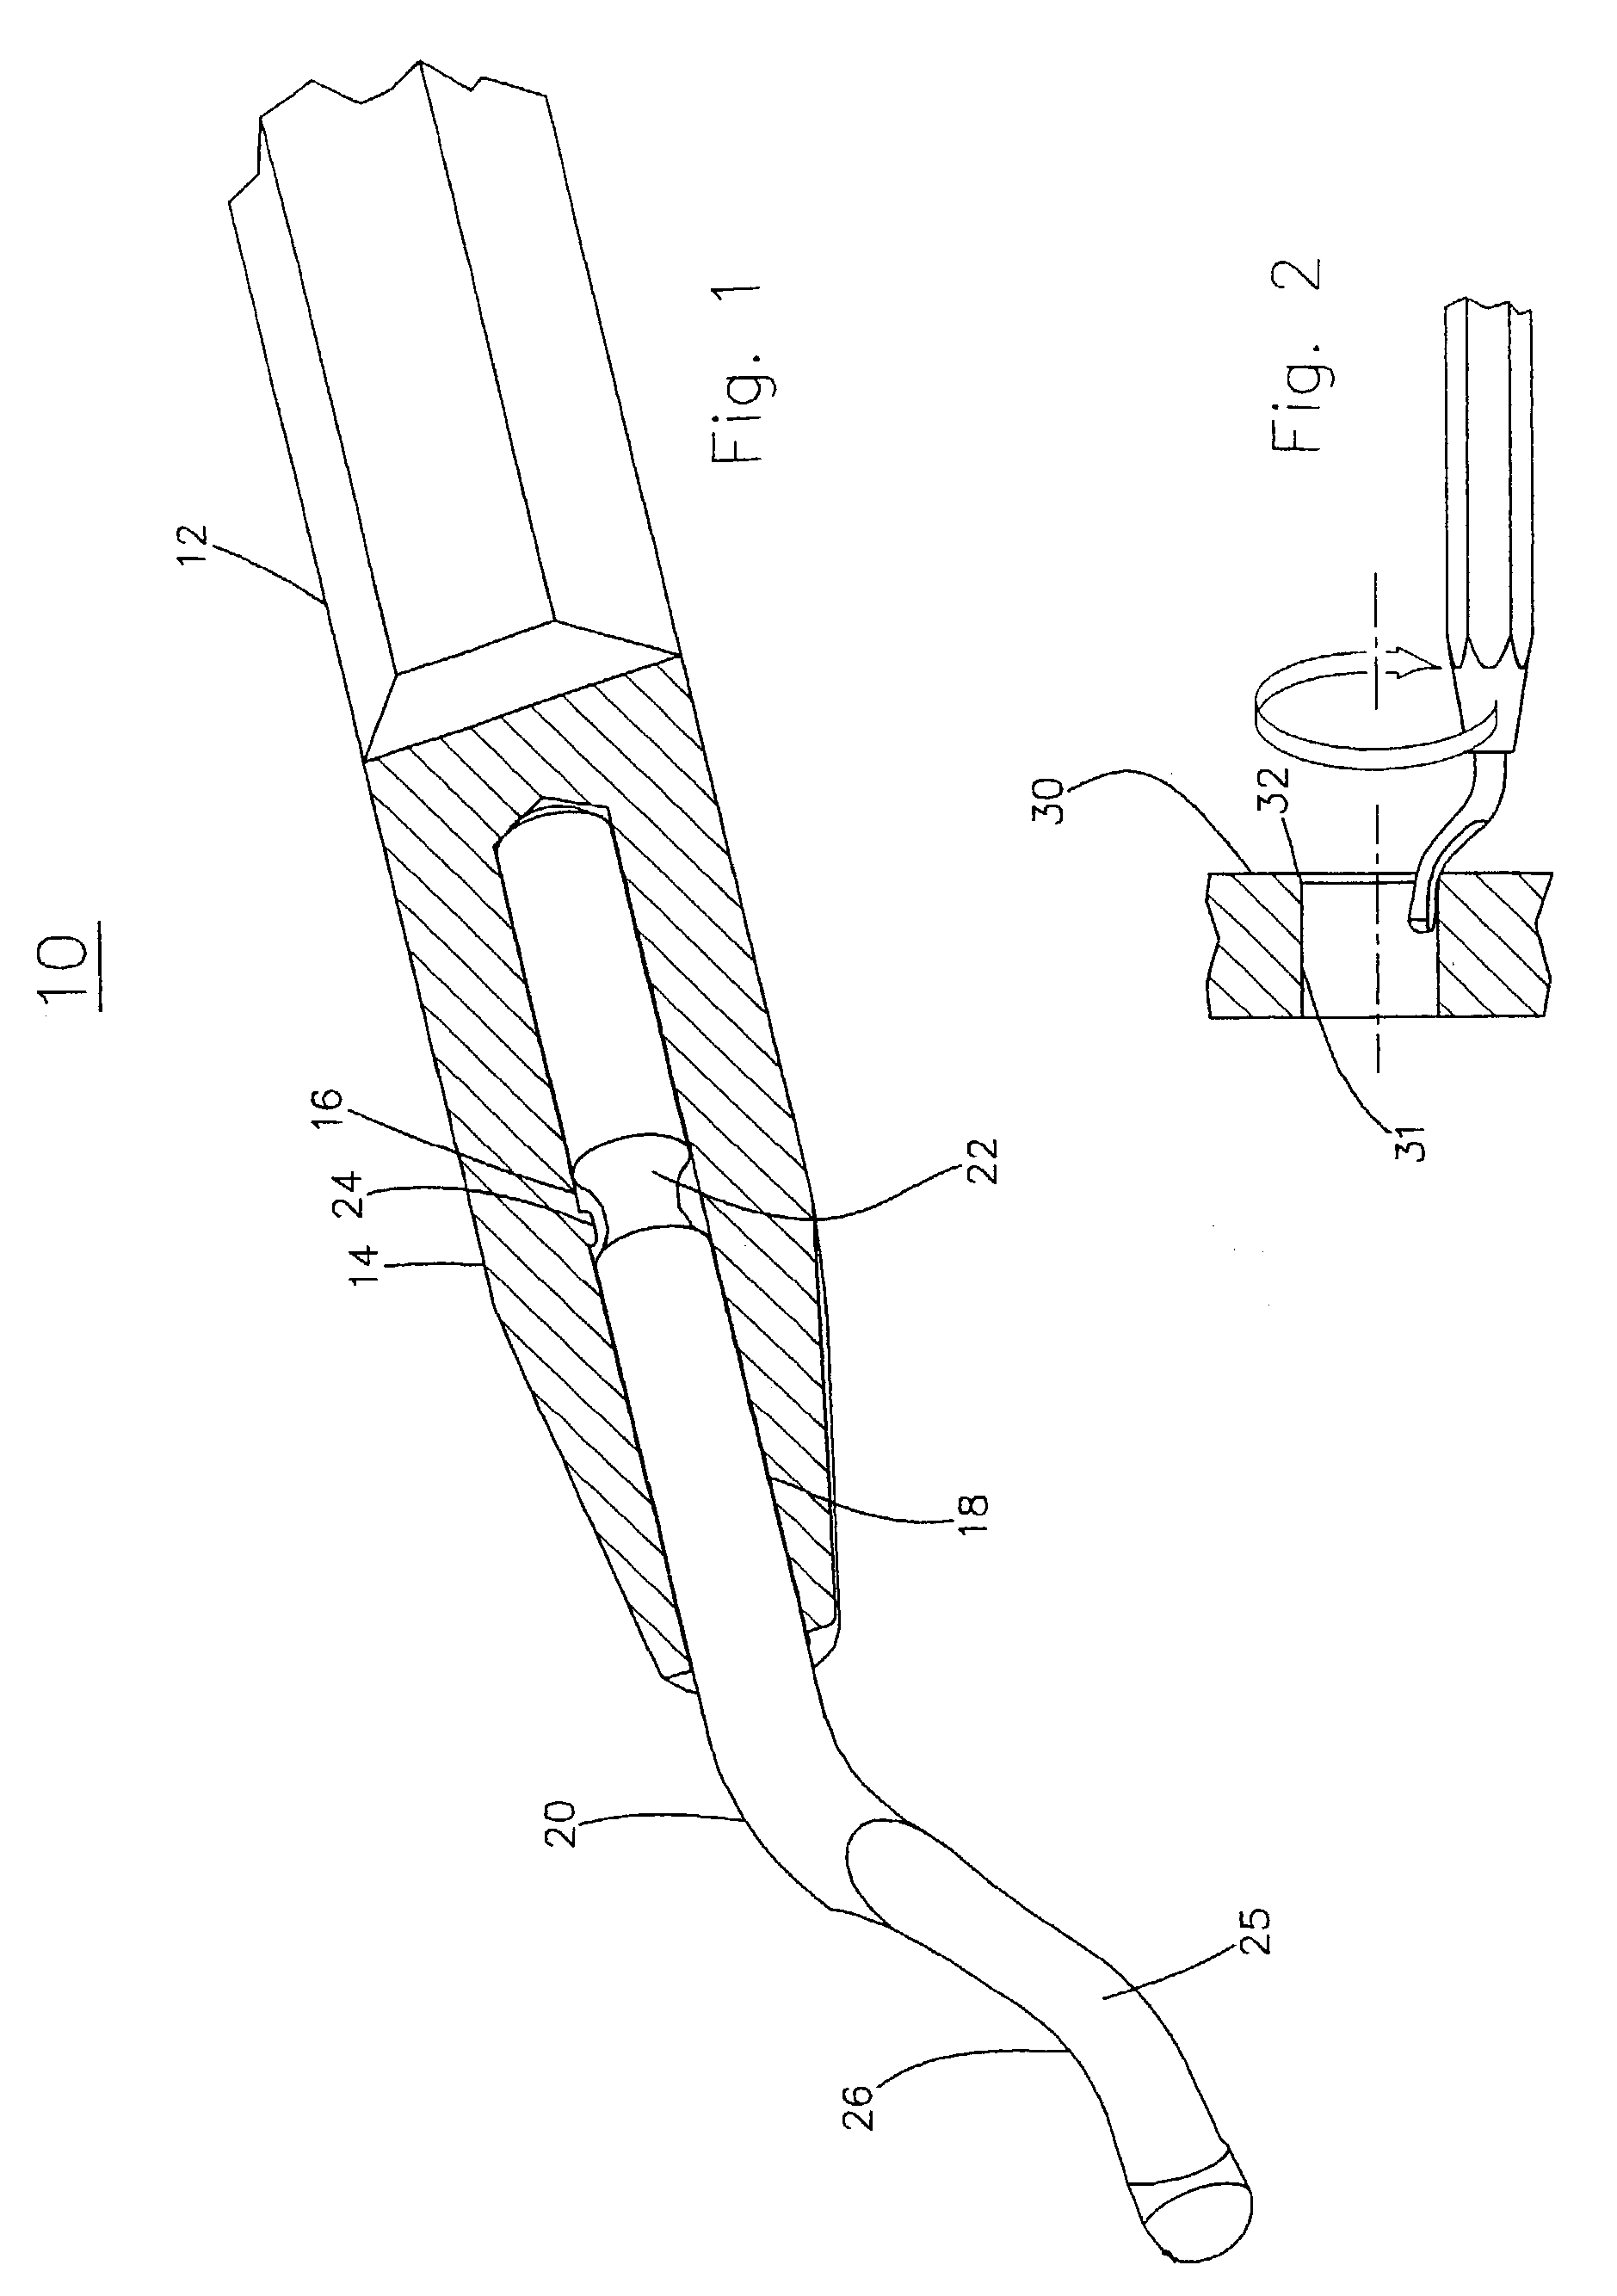 Hand tool and knife for deburring